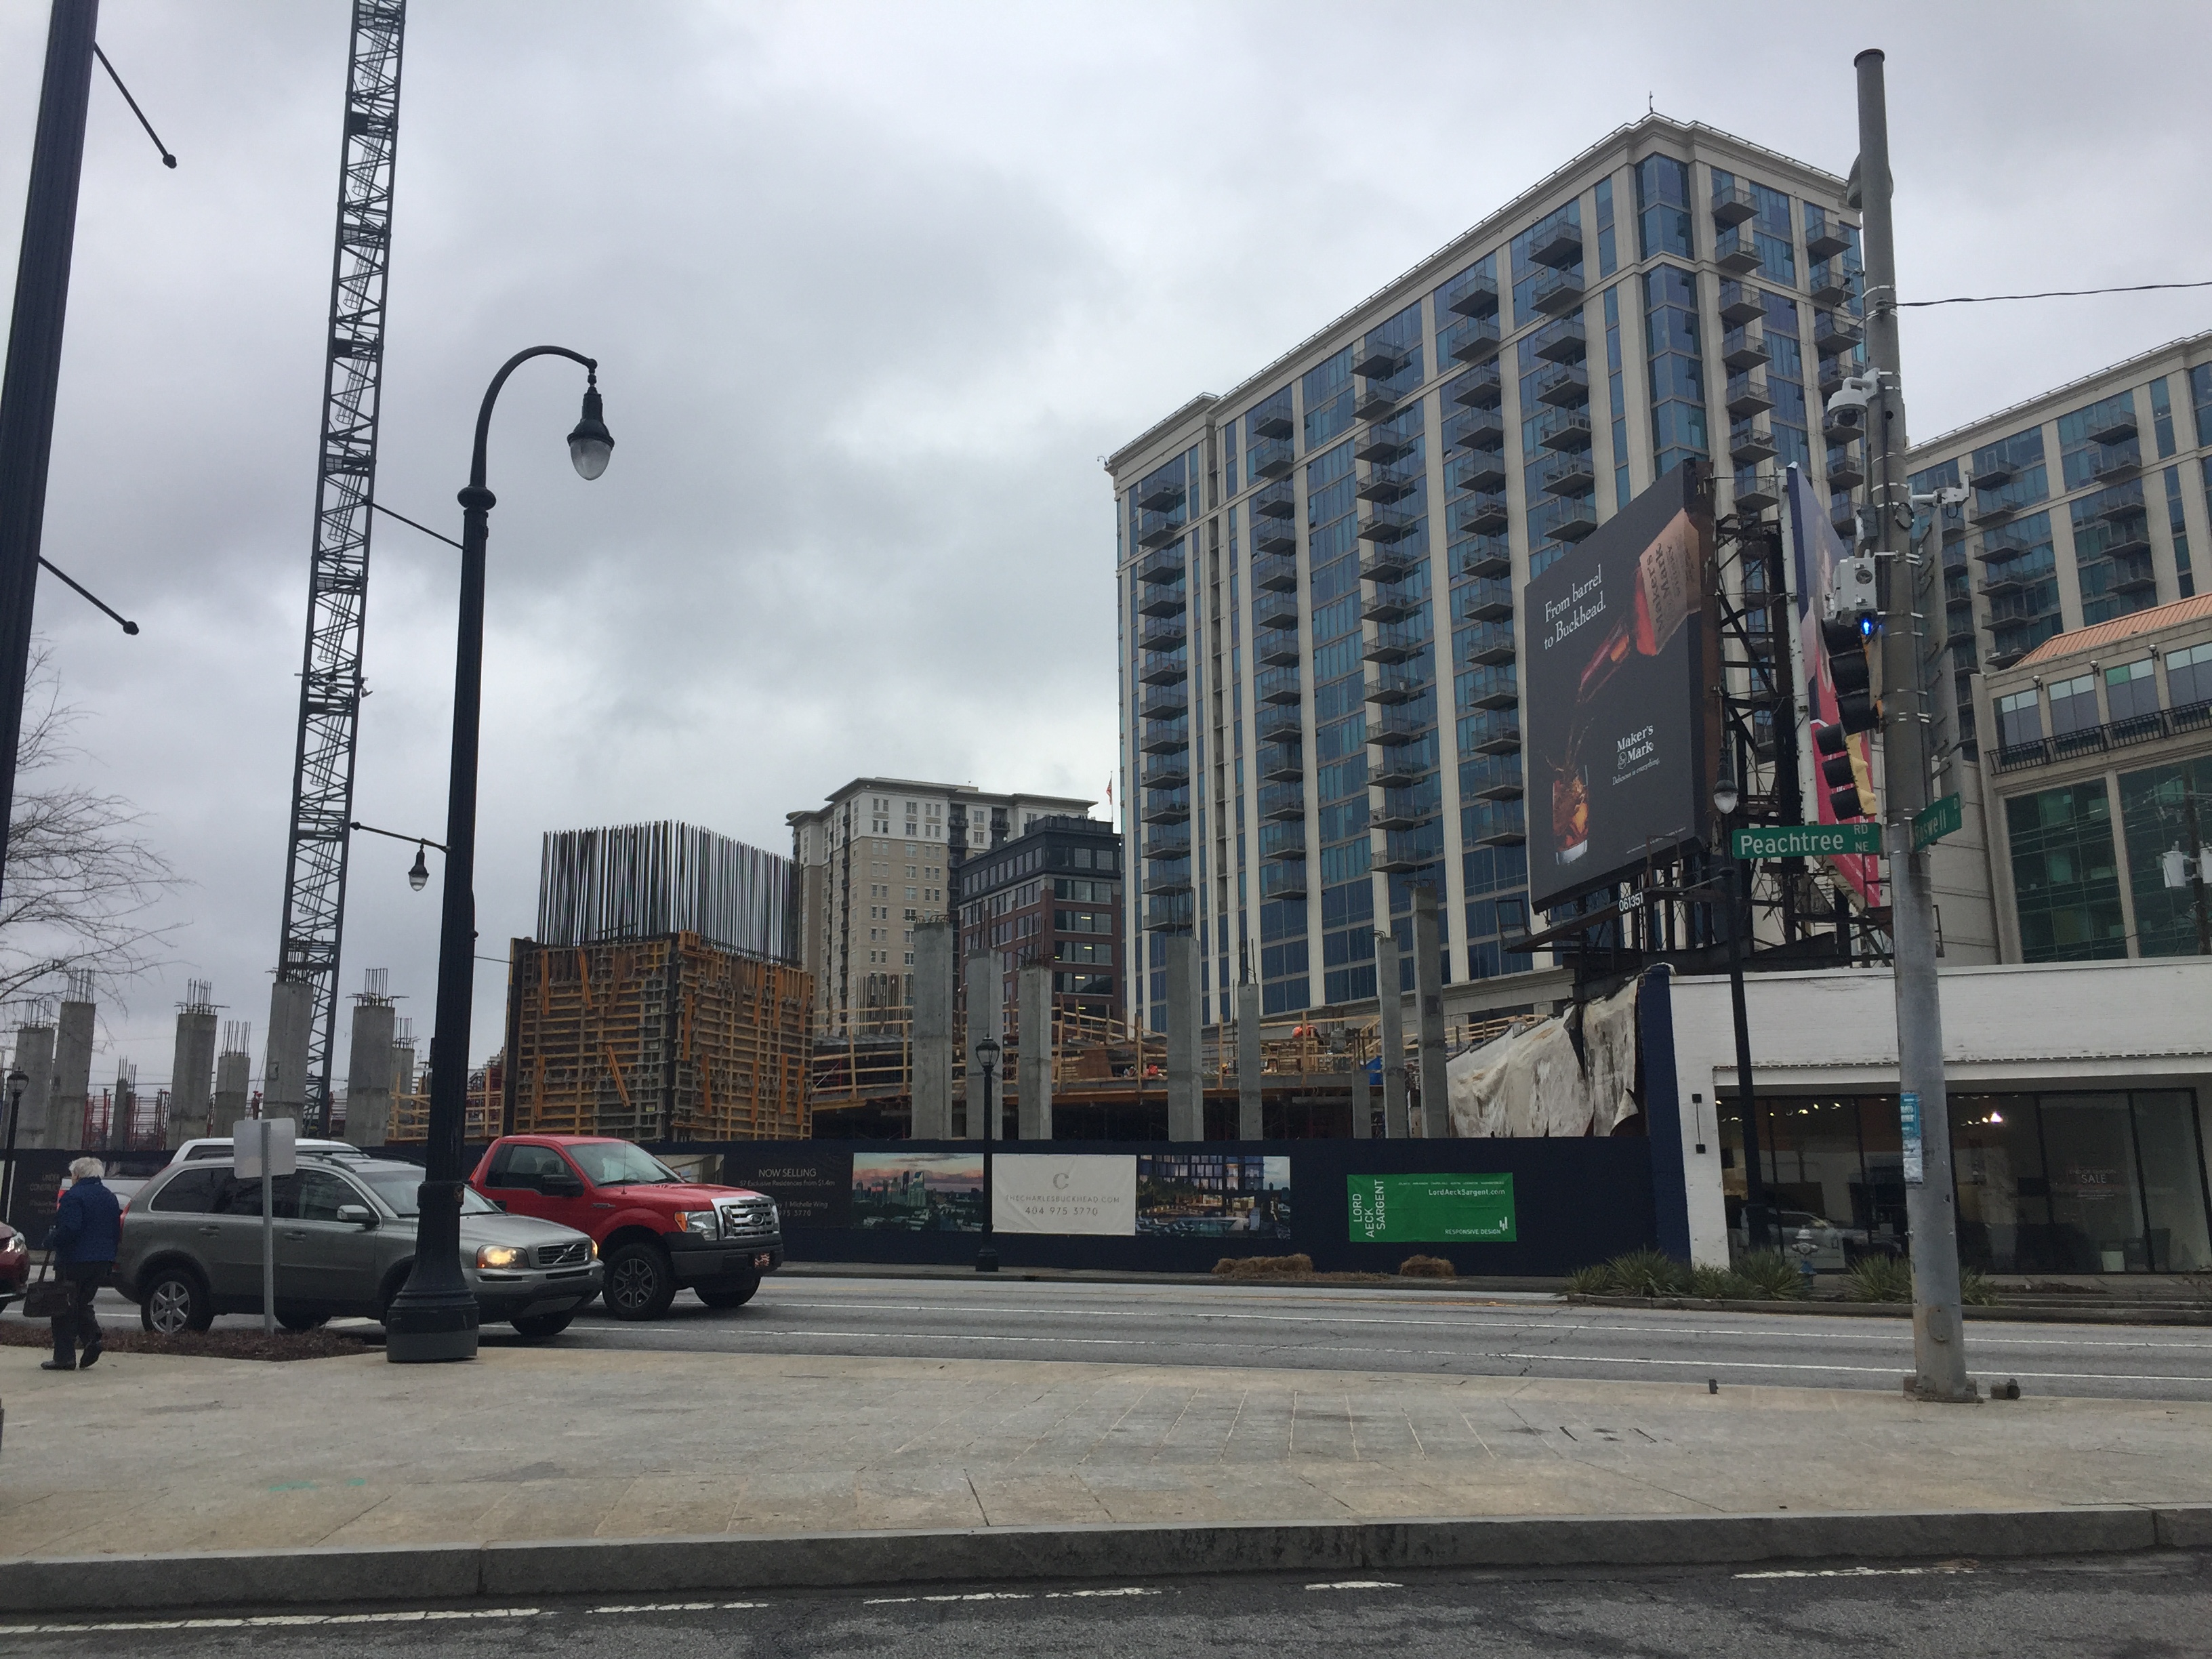 Buckhead village beyond, with construction beginning along Peachtree Road.